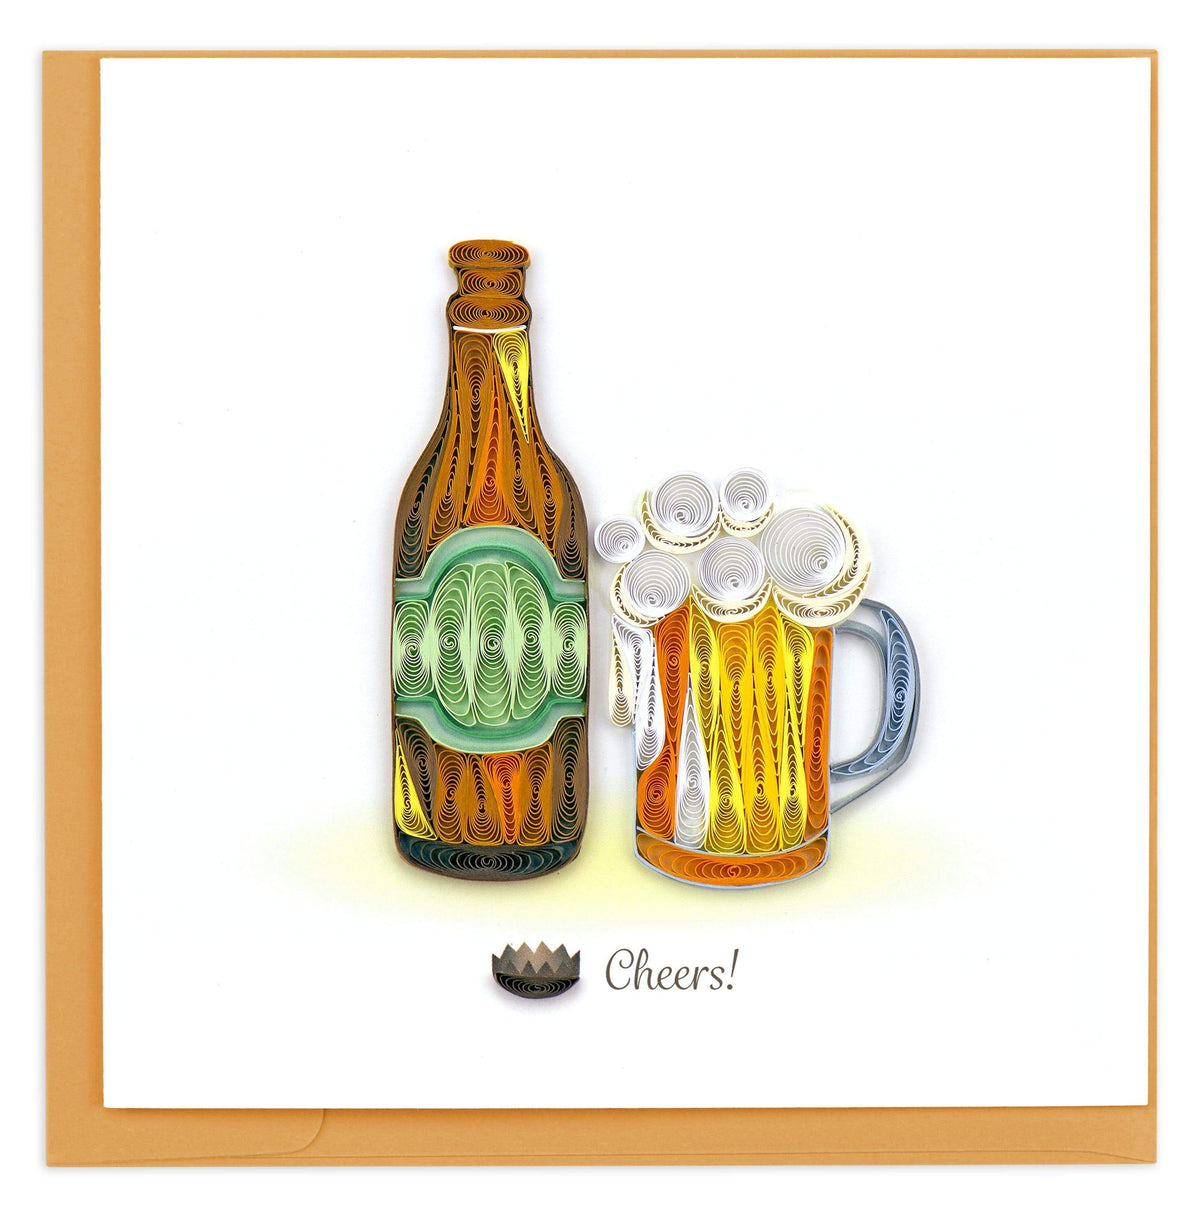 Cheers Quilling Card Quilling Card Llc Cards